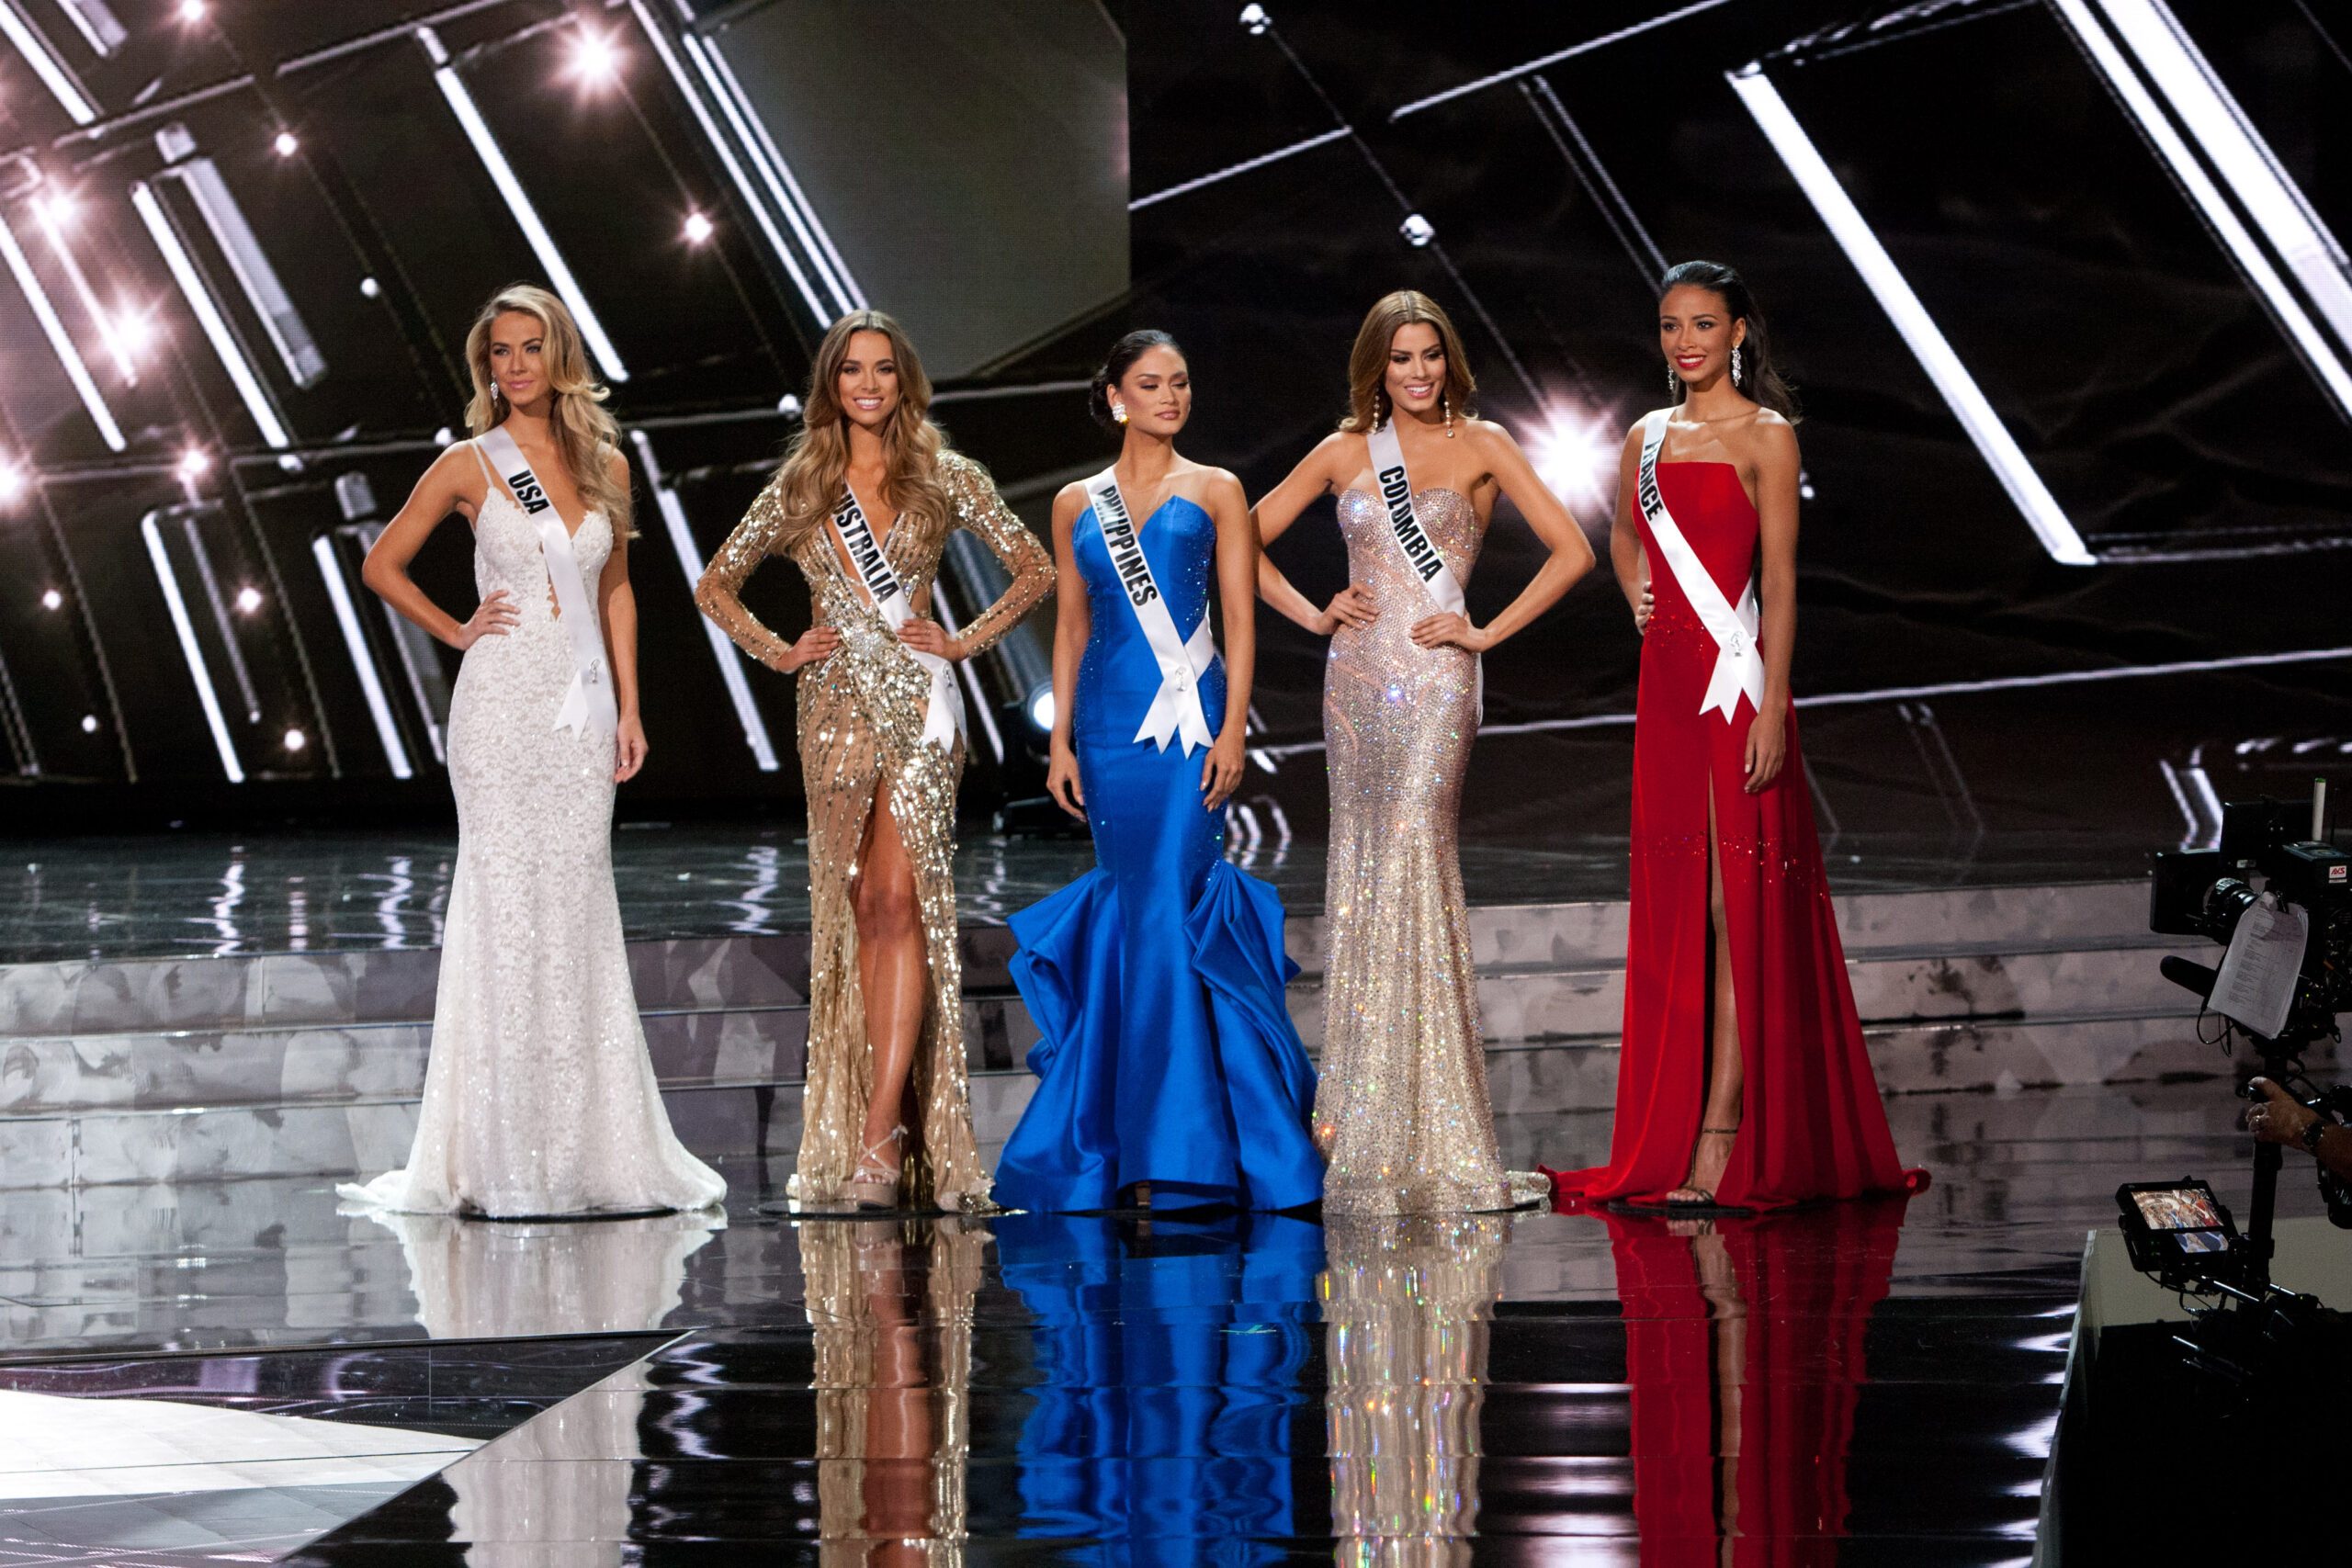 Duterte ‘approves in principle’ plans to host Miss Universe in PH – DOT